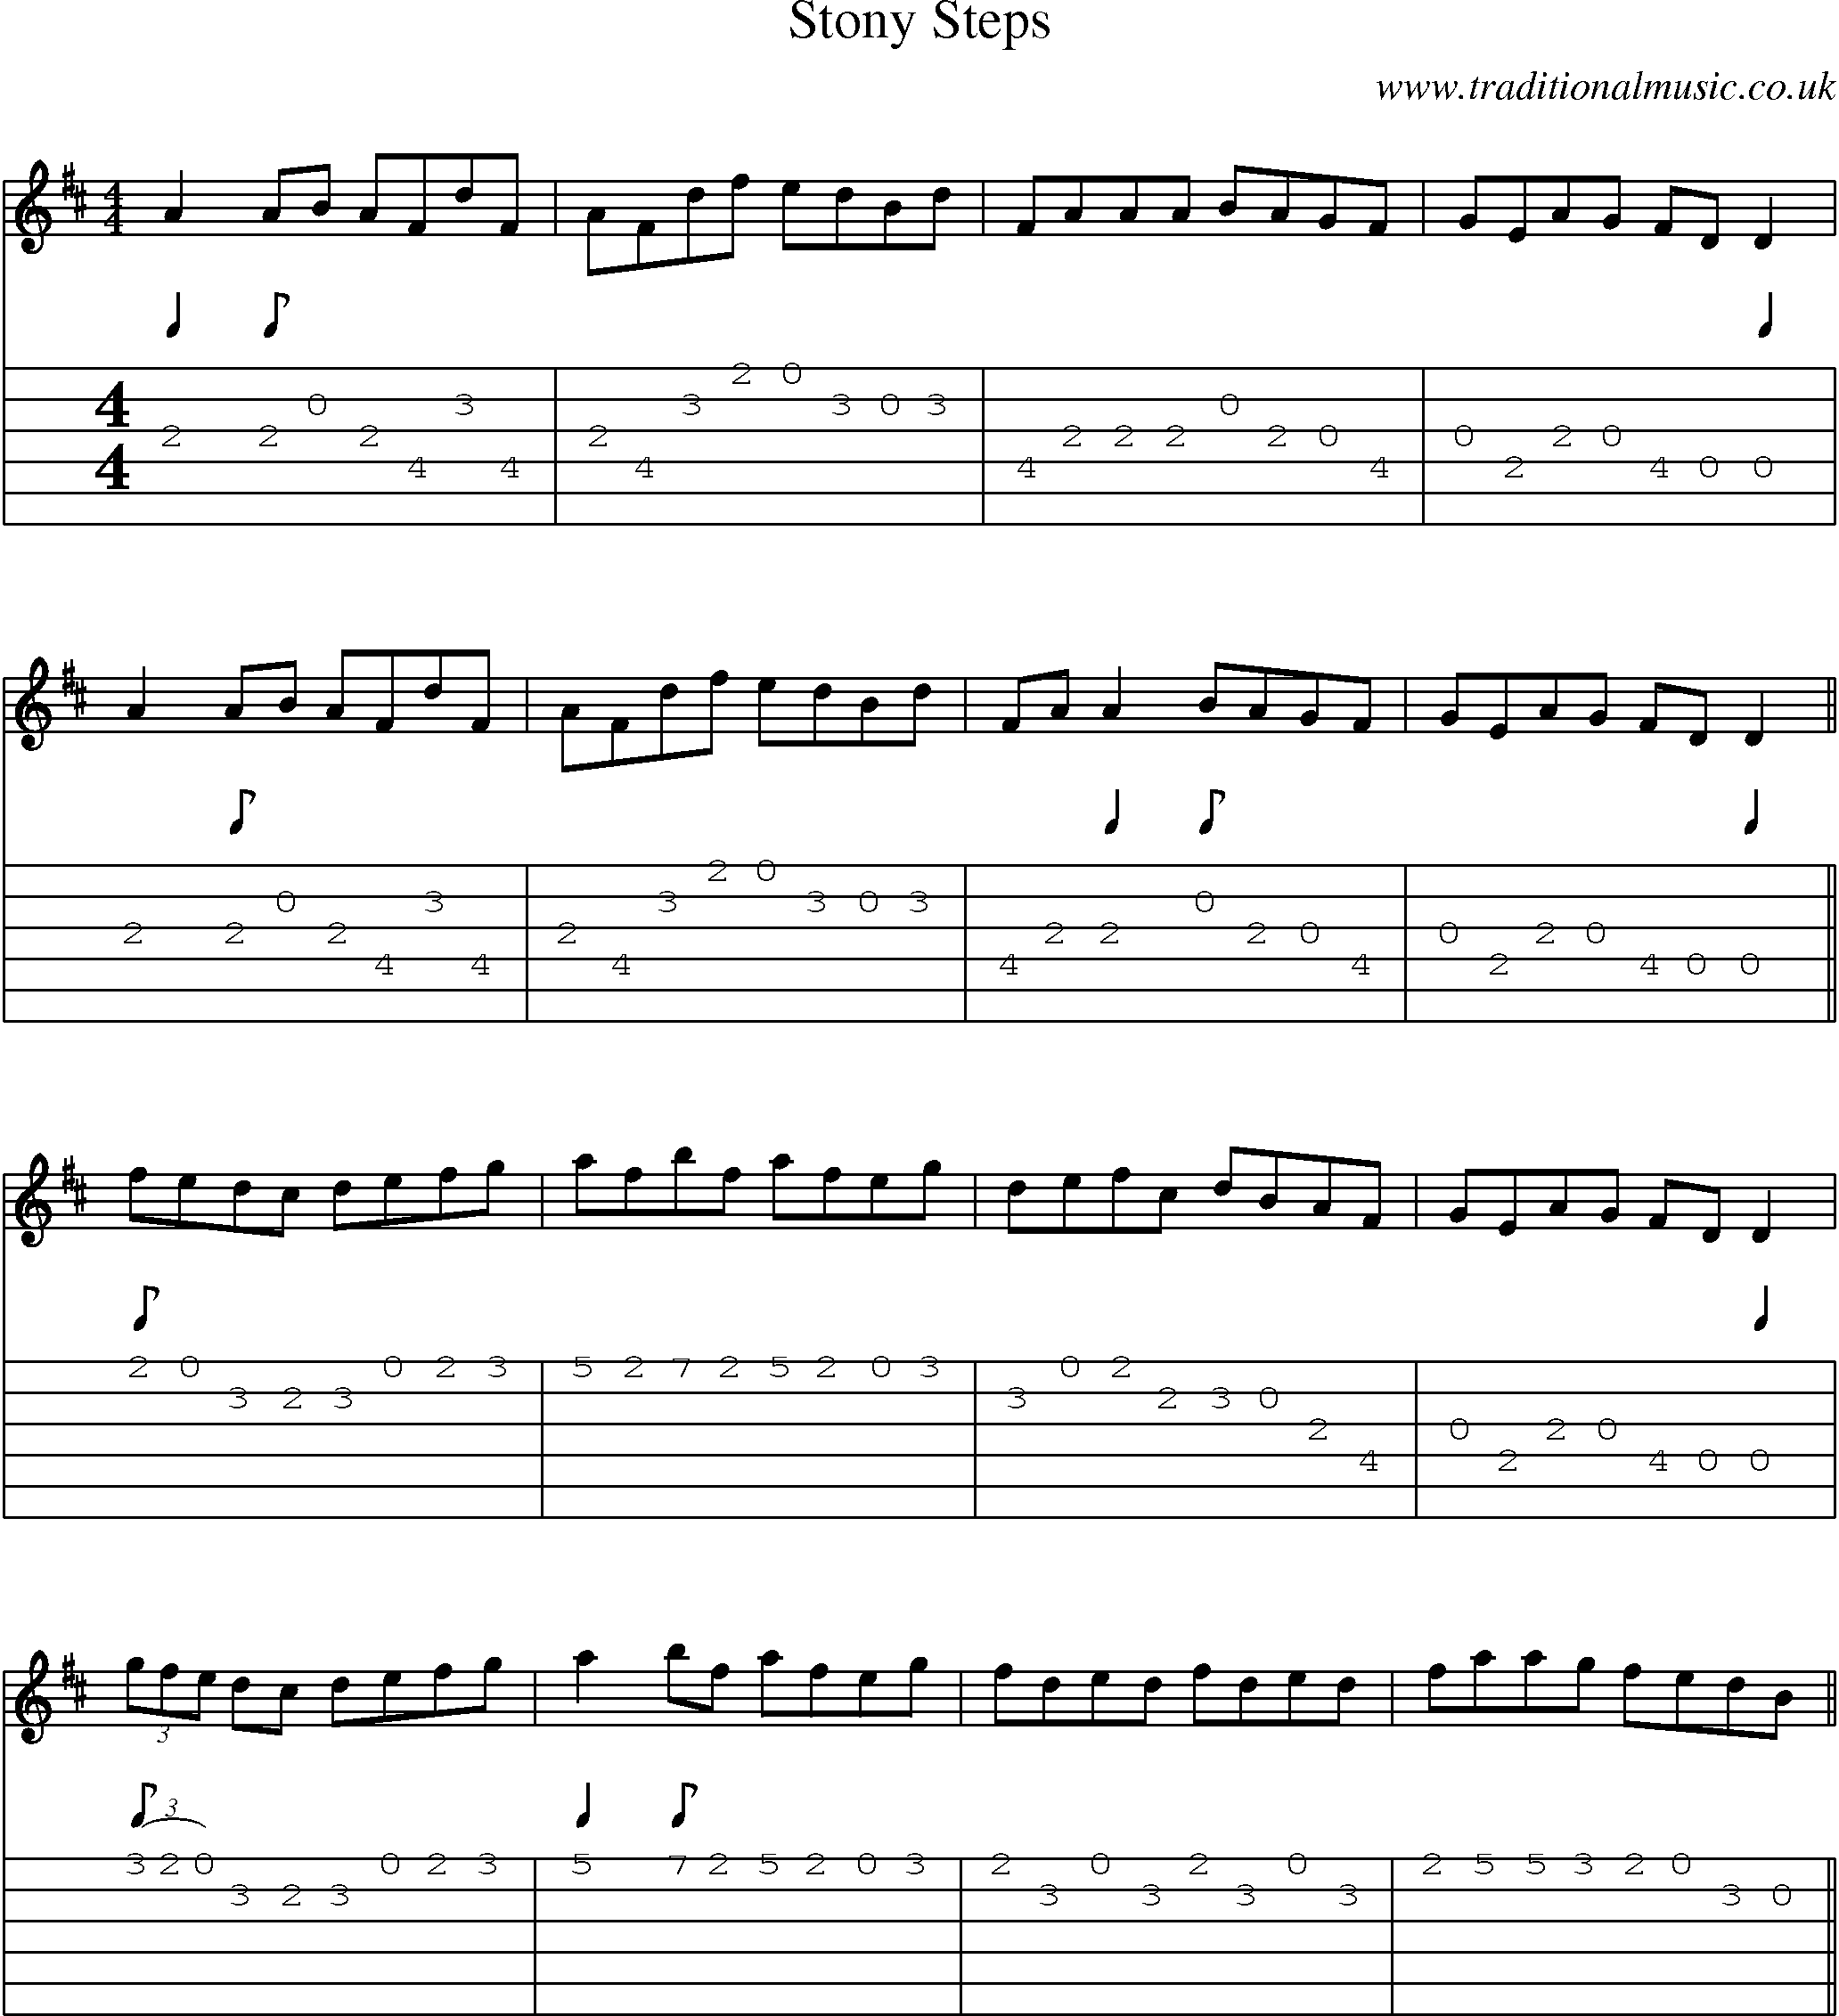 Music Score and Guitar Tabs for Stony Steps